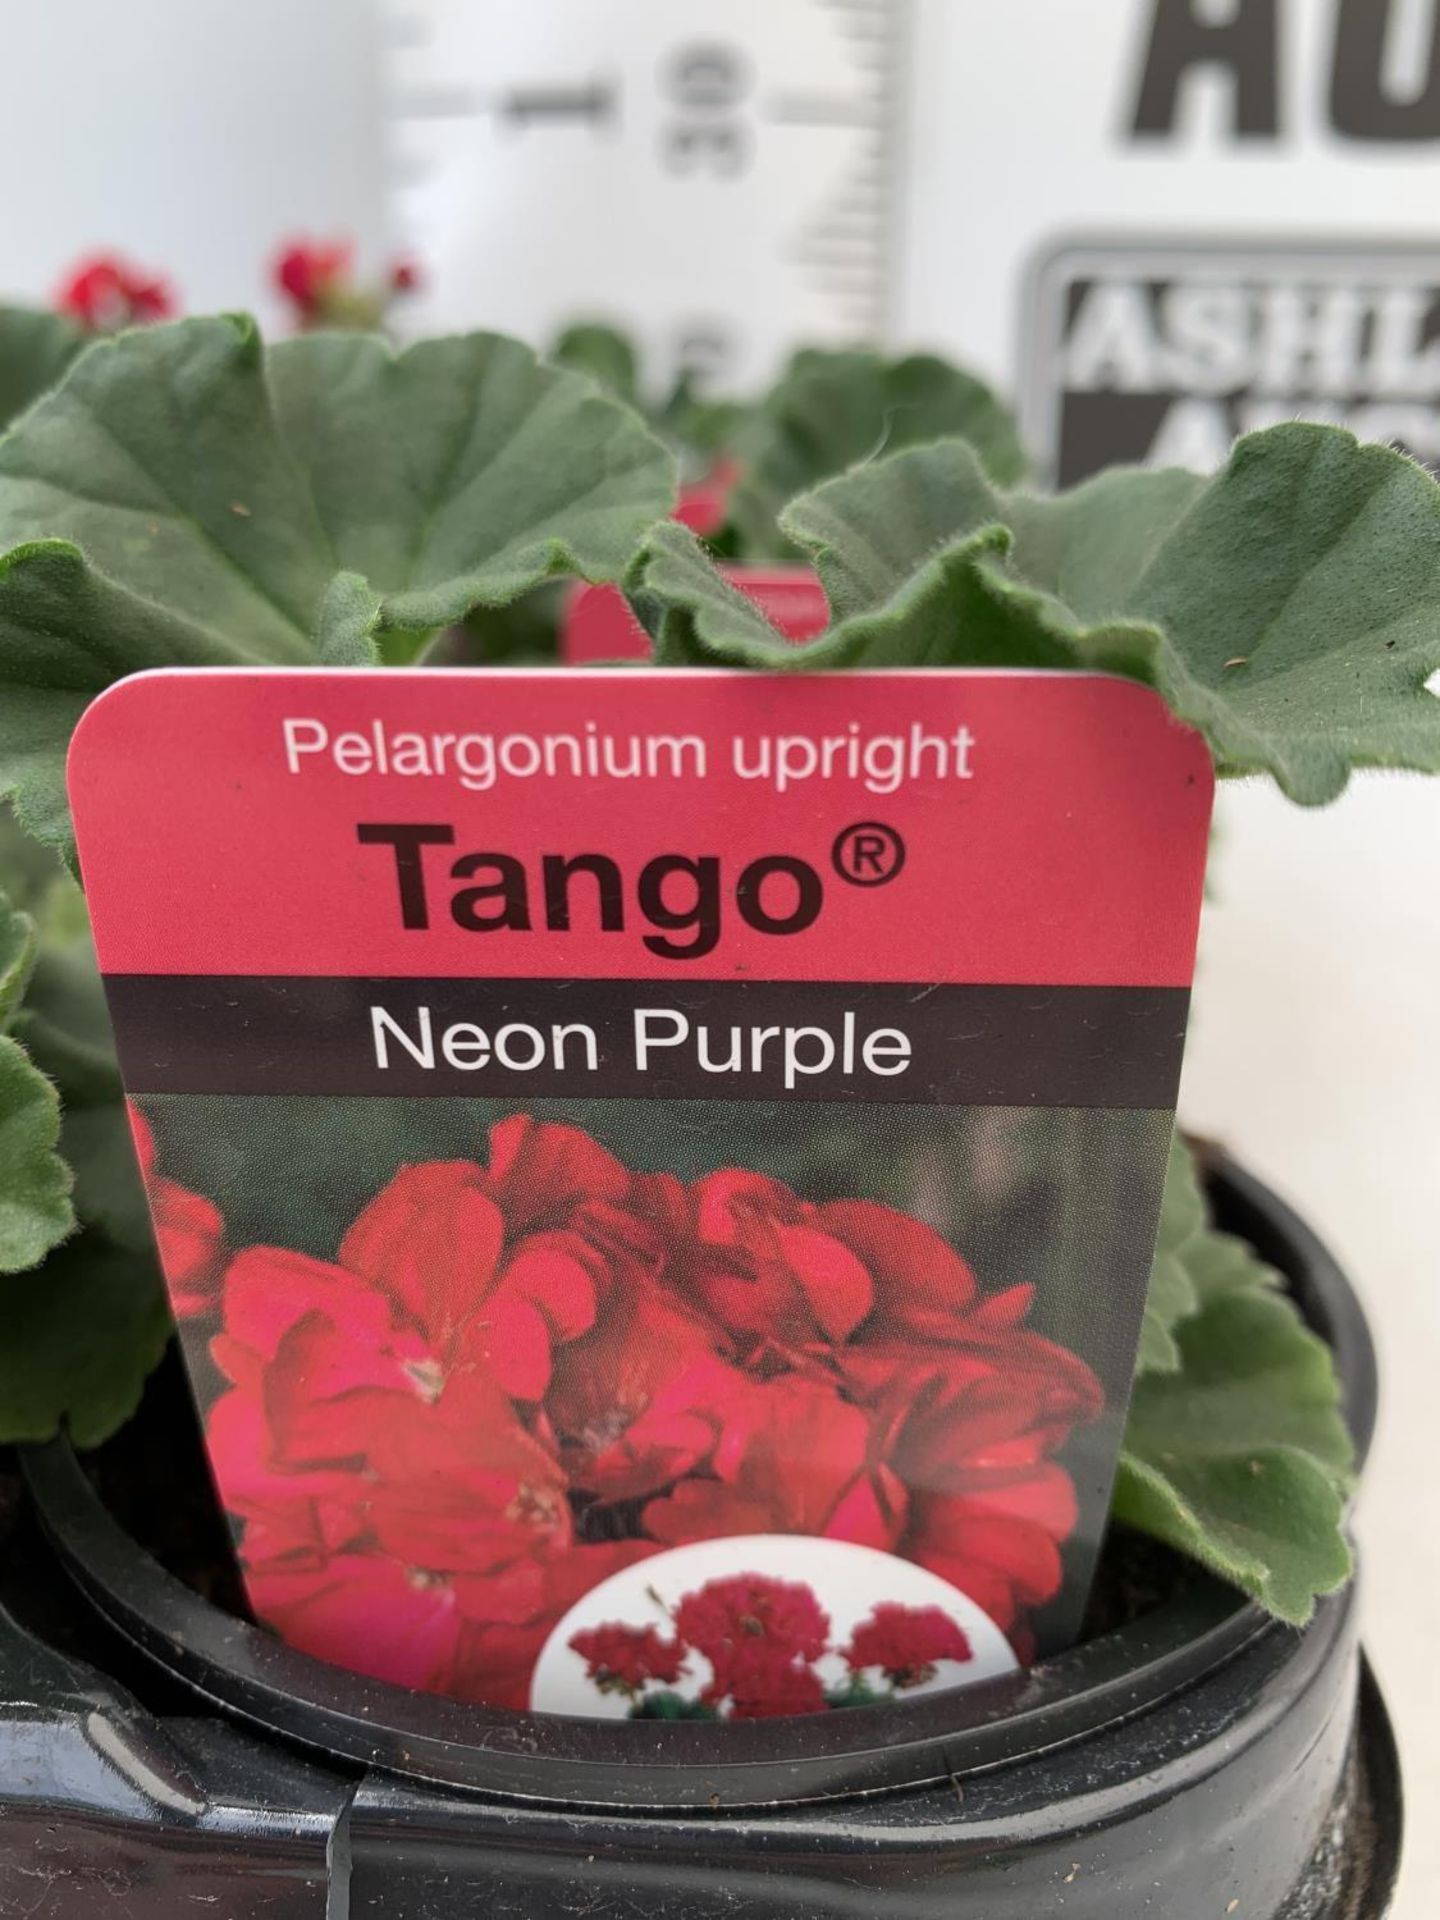 FIFTEEN PELARGONIUM UPRIGHT TANGO IN NEON PURPLE BASKET PLANTS ON A TRAY IN P9 POTS PLUS VAT TO BE - Image 4 of 4